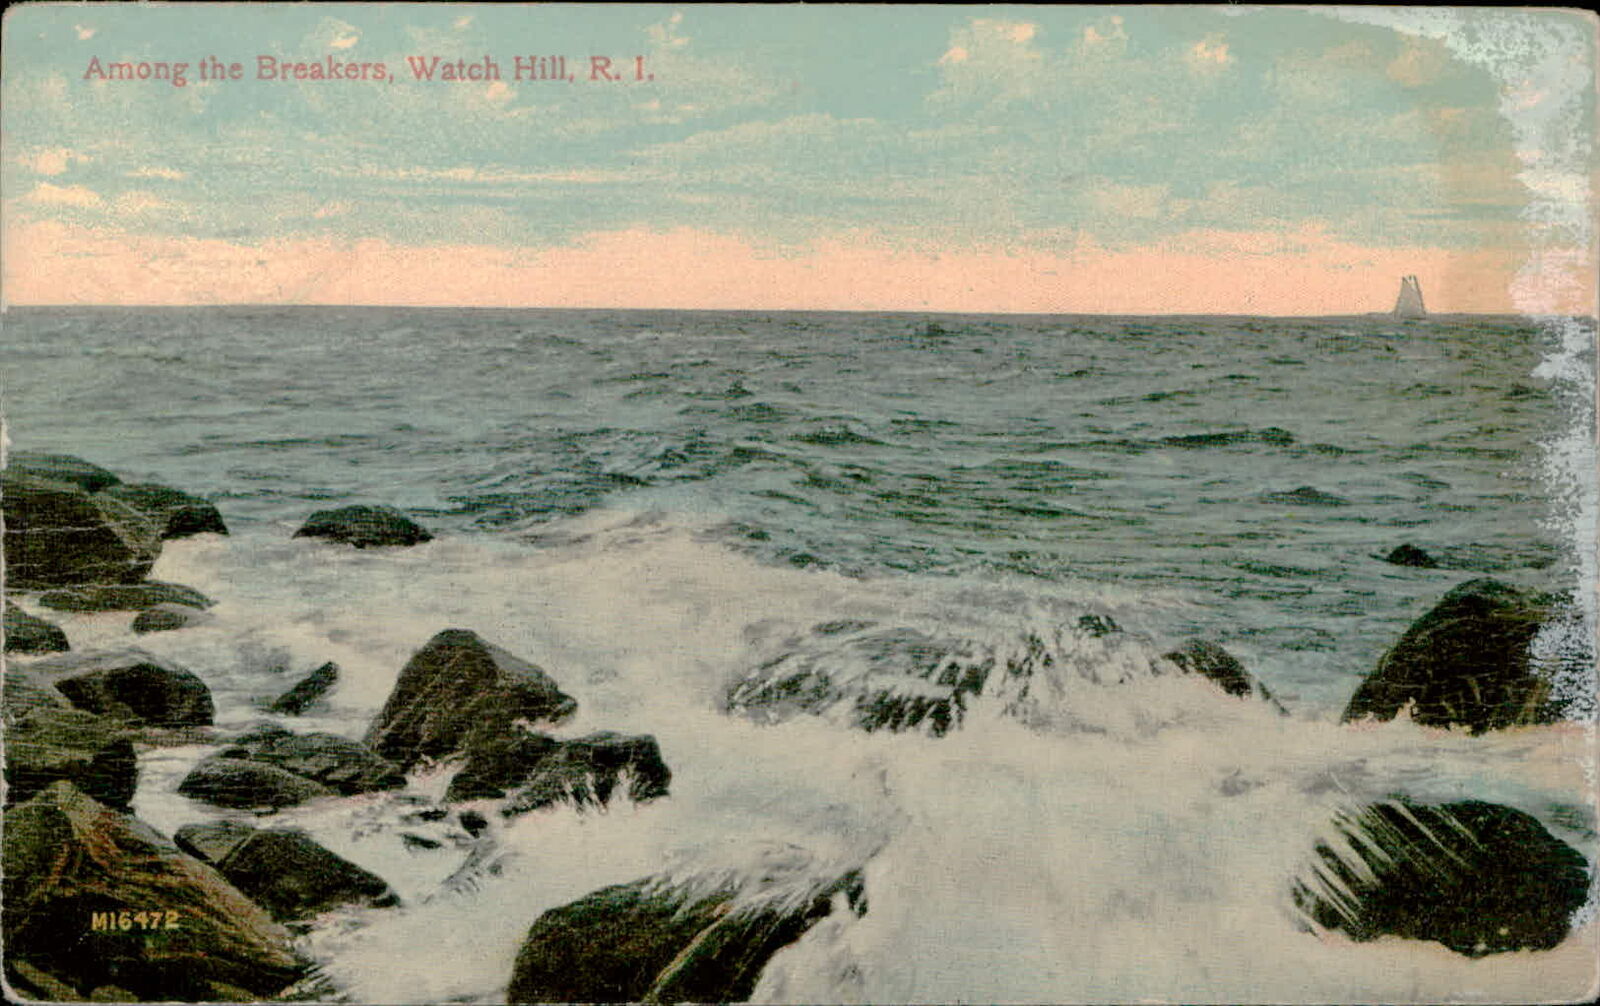 Postcard: Among the Breakers, Watch Hill, R. I. M16472